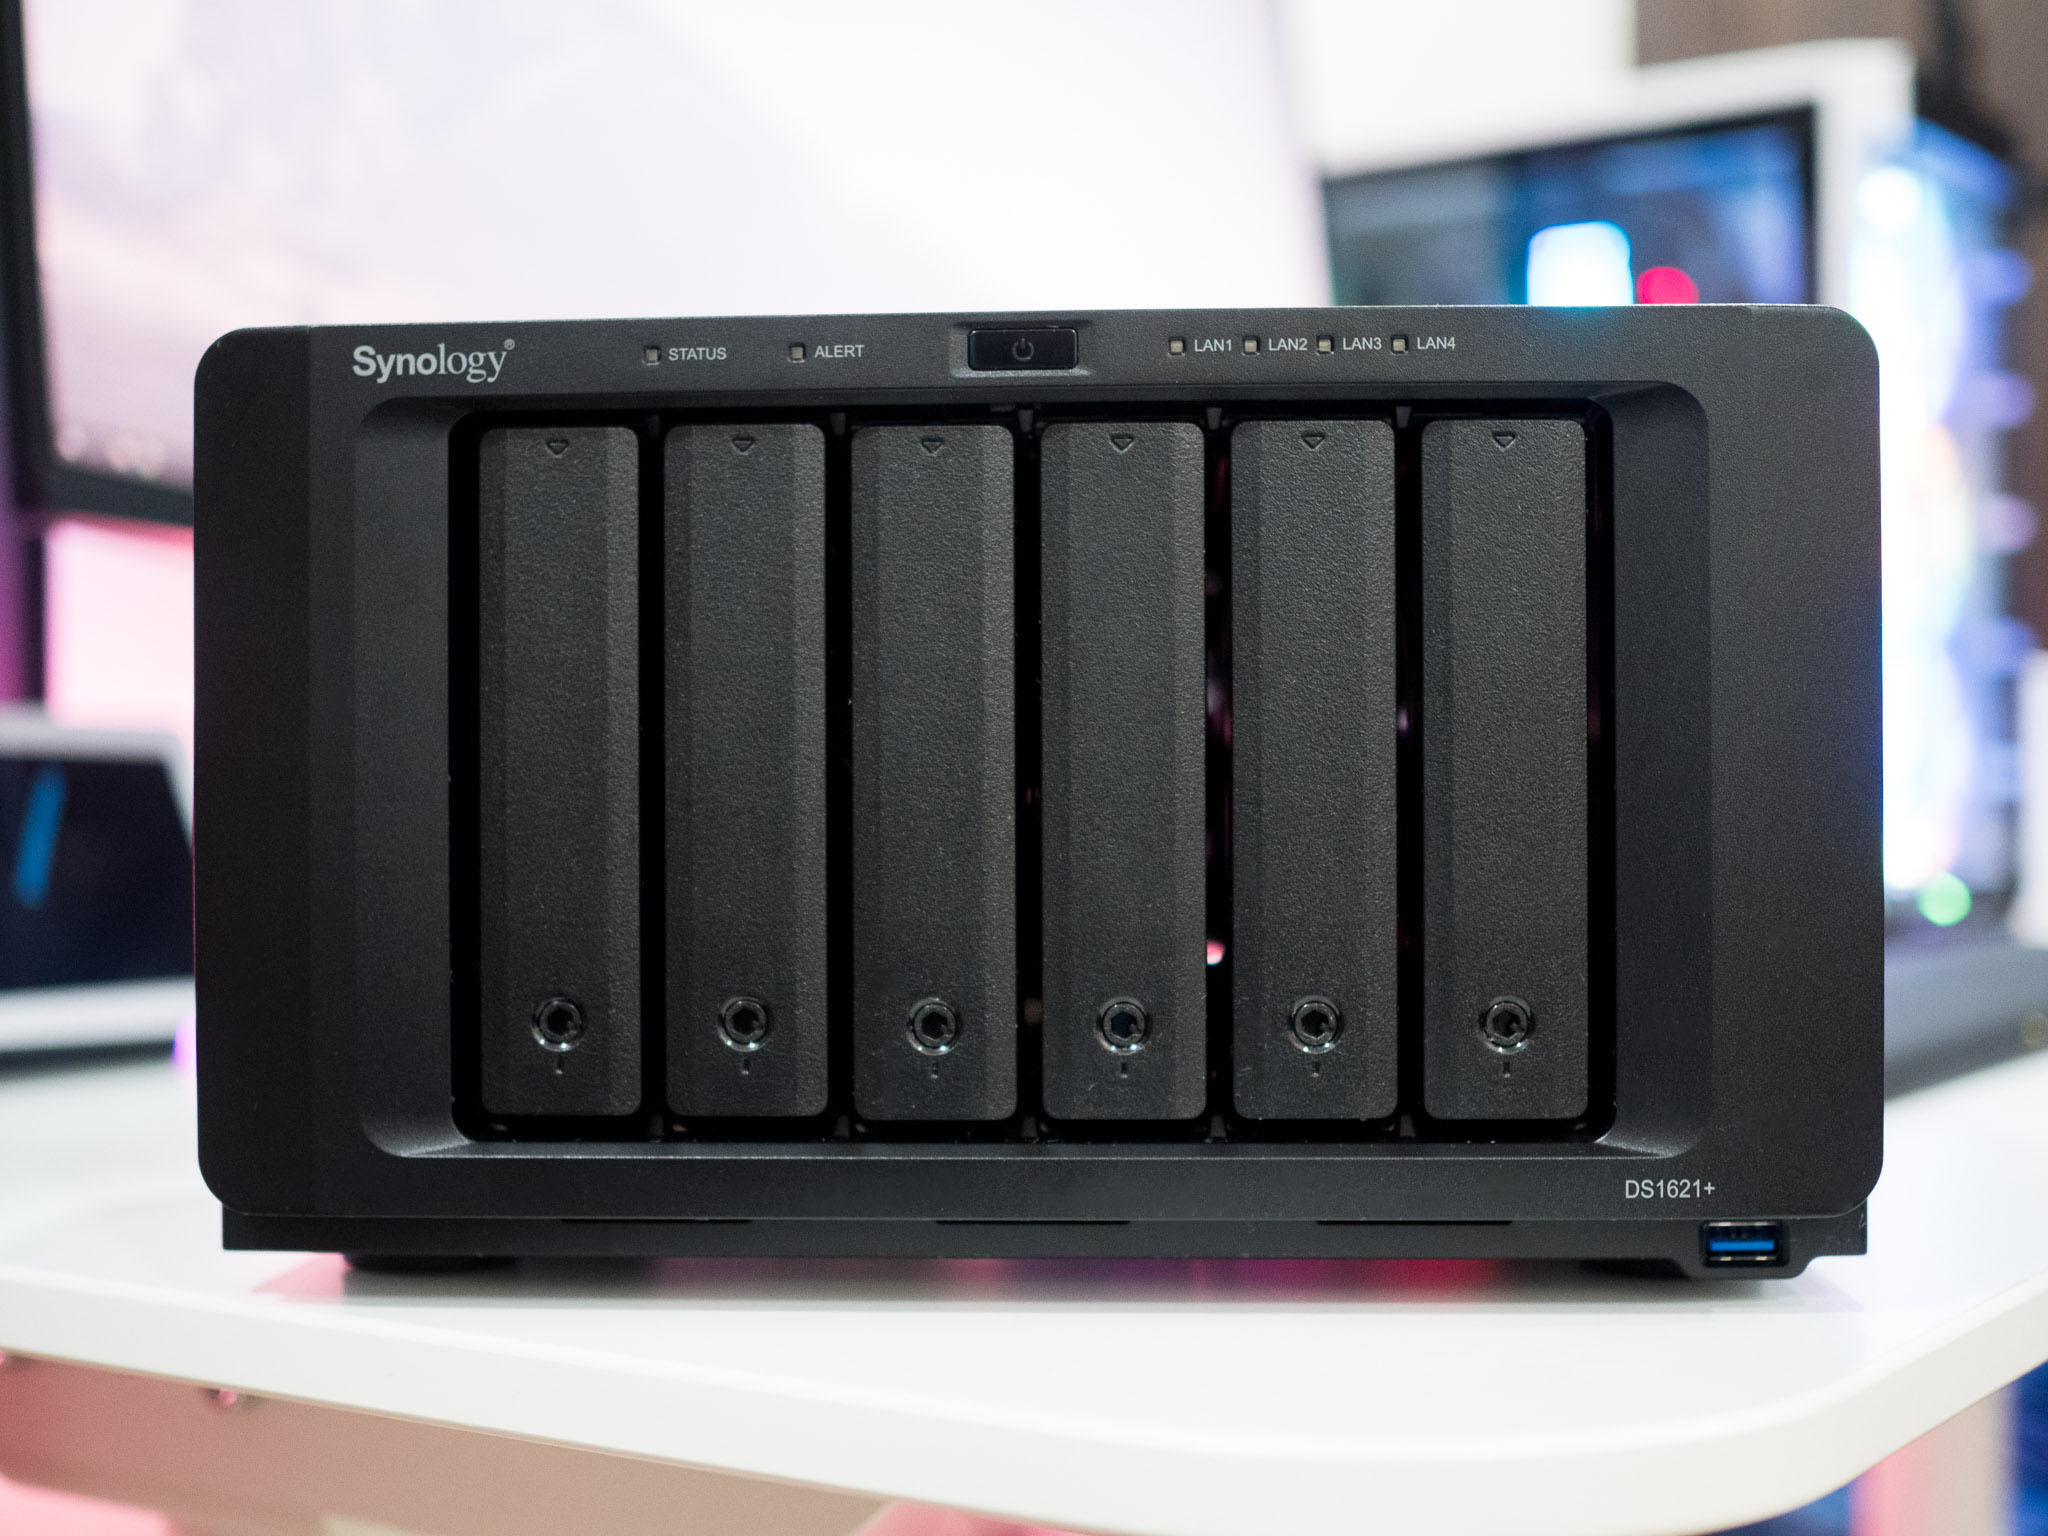 Synology DiskStation DS1621+ review: This Ryzen-powered NAS ticks